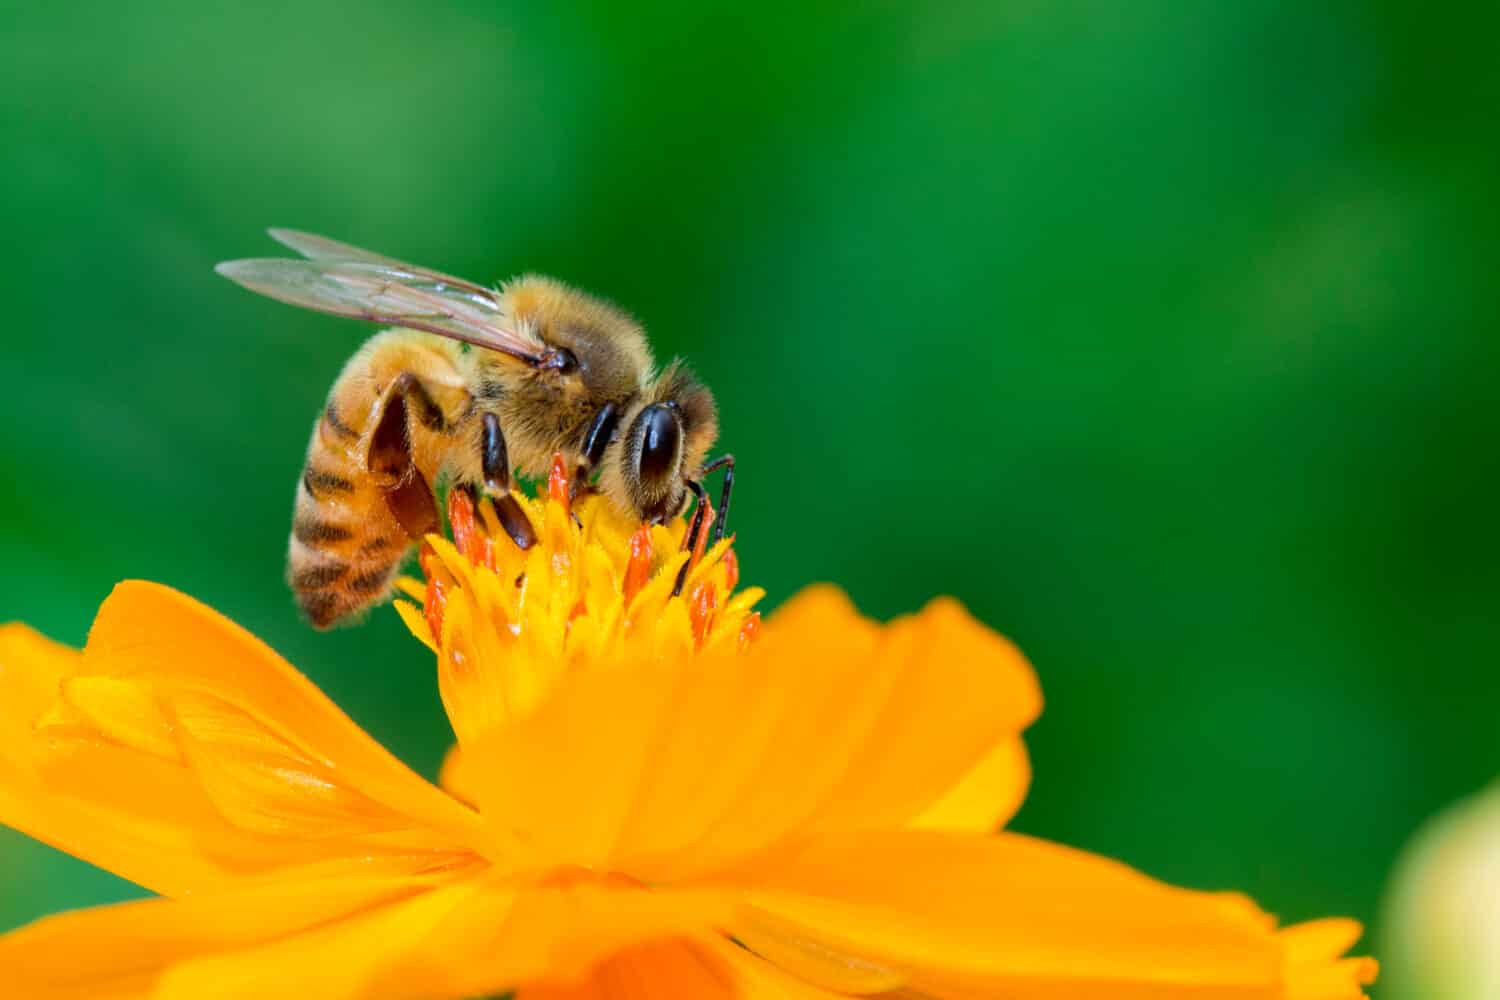 Image of bee or honeybee on yellow flower collects nectar. Golden honeybee on flower pollen. Insect. Animal